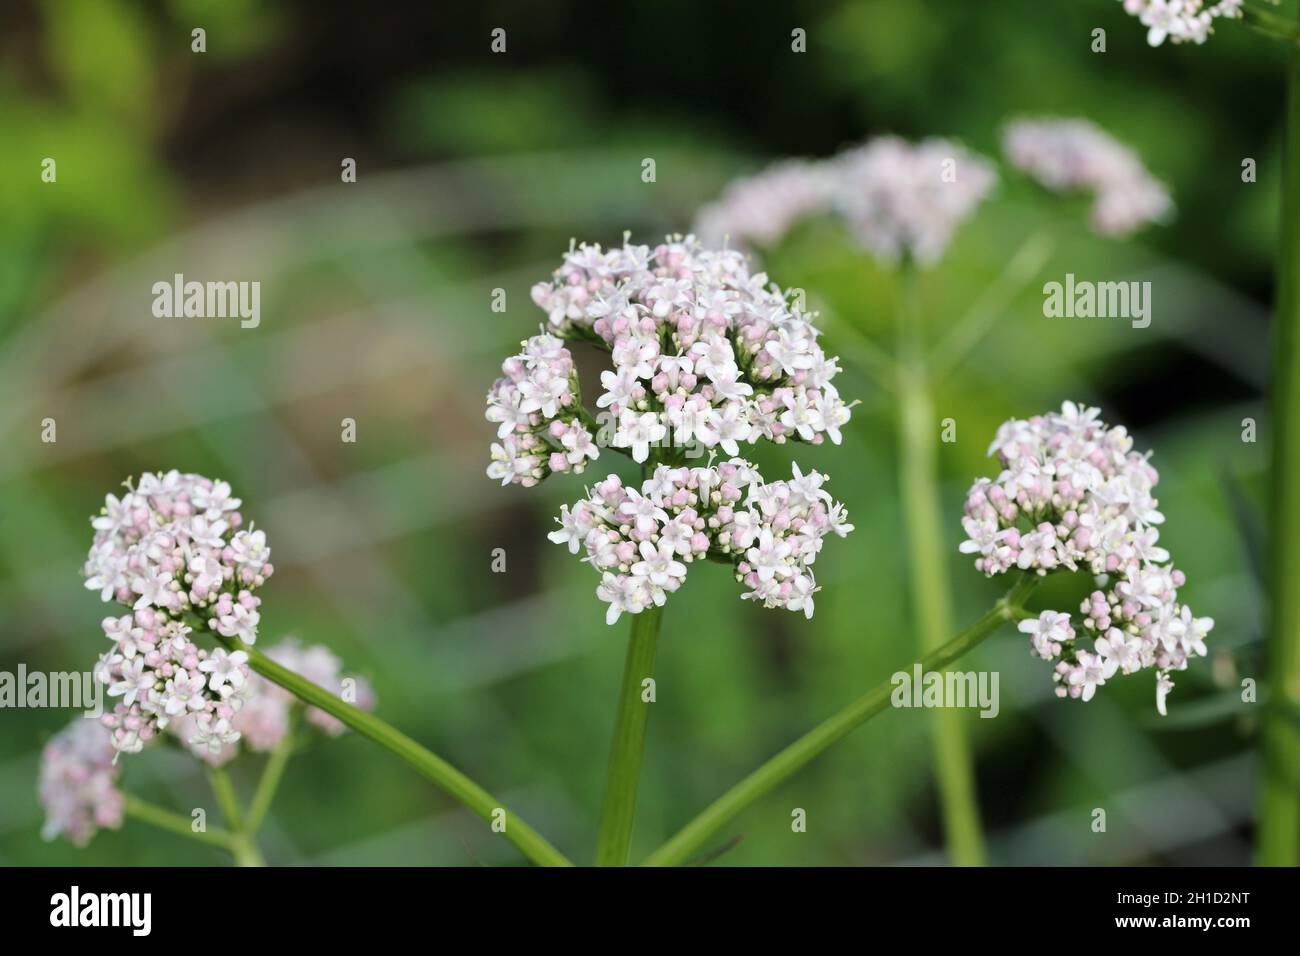 Pink and white elder leaved valerian, Valeriana officinalis subspecies sambucifolia, flowers with a blurred background of leaves. Stock Photo